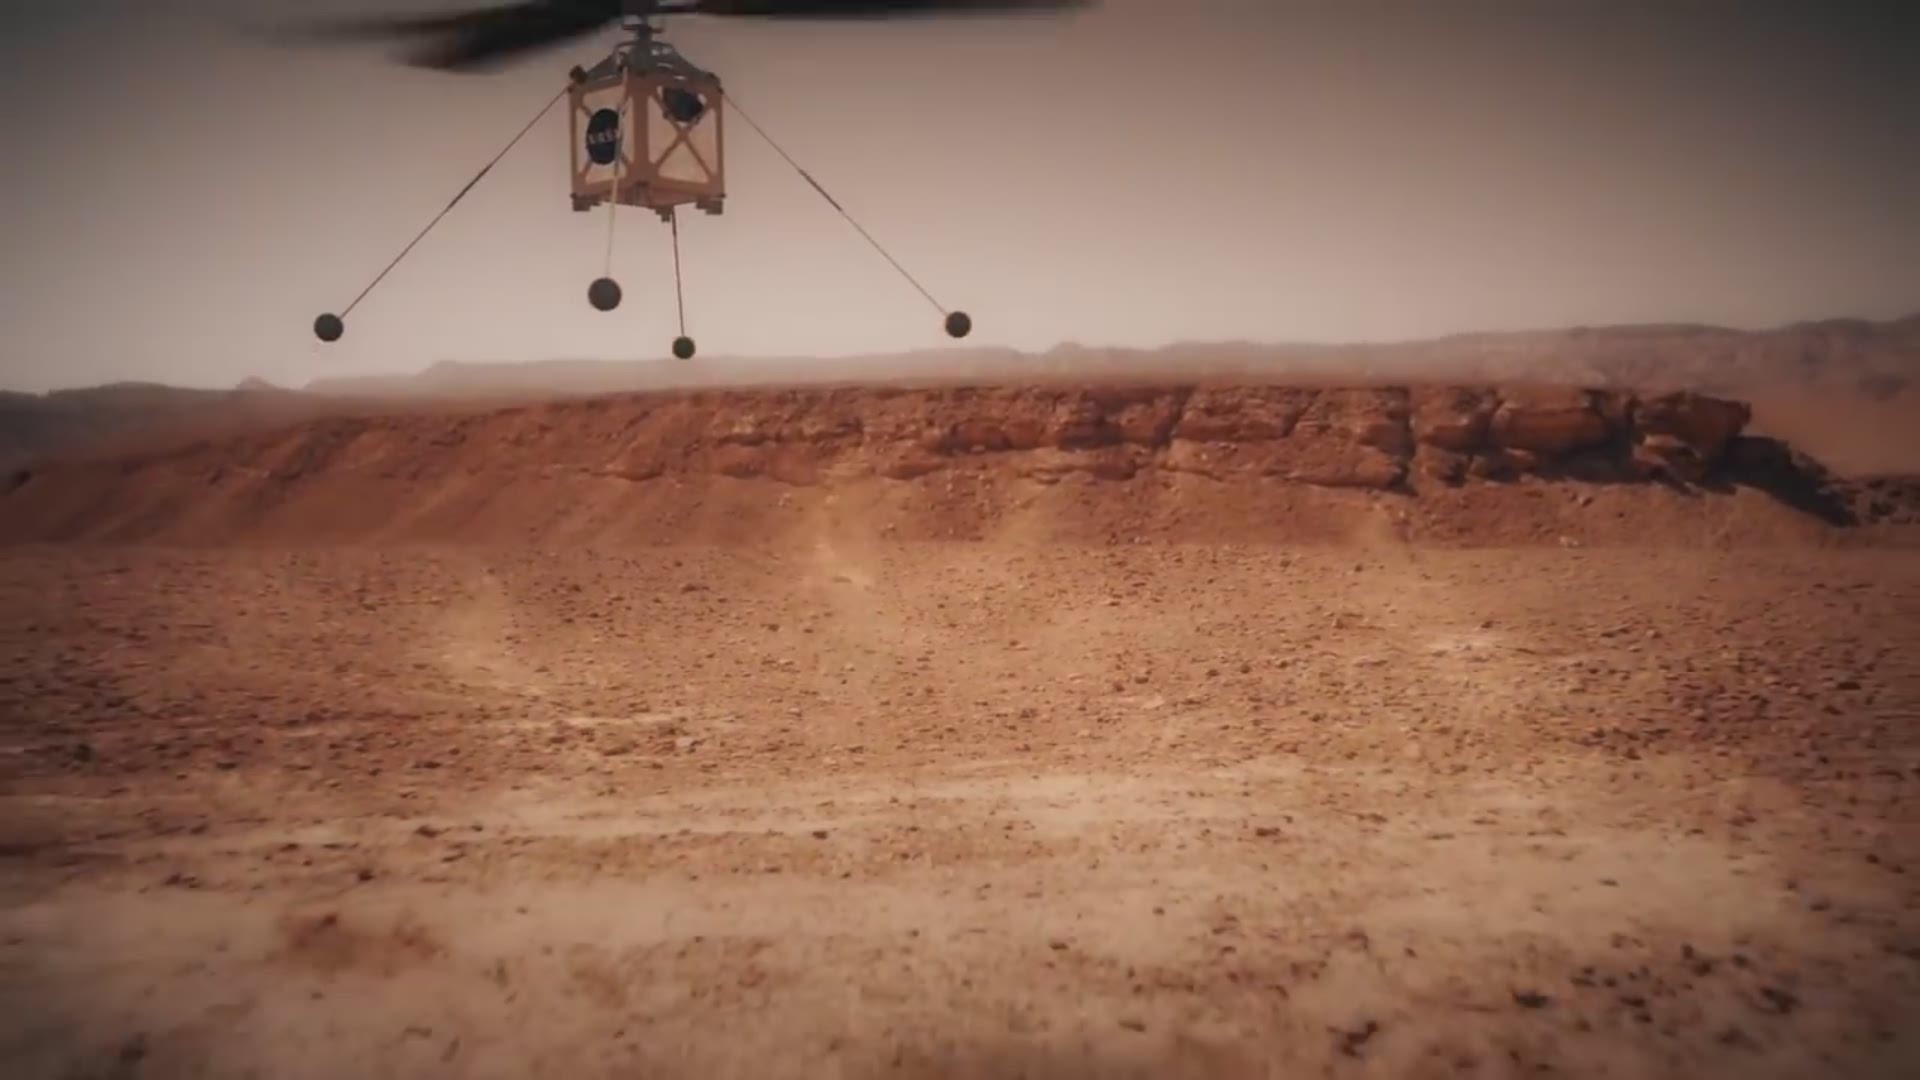 The Mars Helicopter is a technology demonstration that will travel to the Red Planet with the Mars 2020 rover. It will attempt controlled flight in Mars' thin atmosphere, which may enable more ambitious missions in the future.